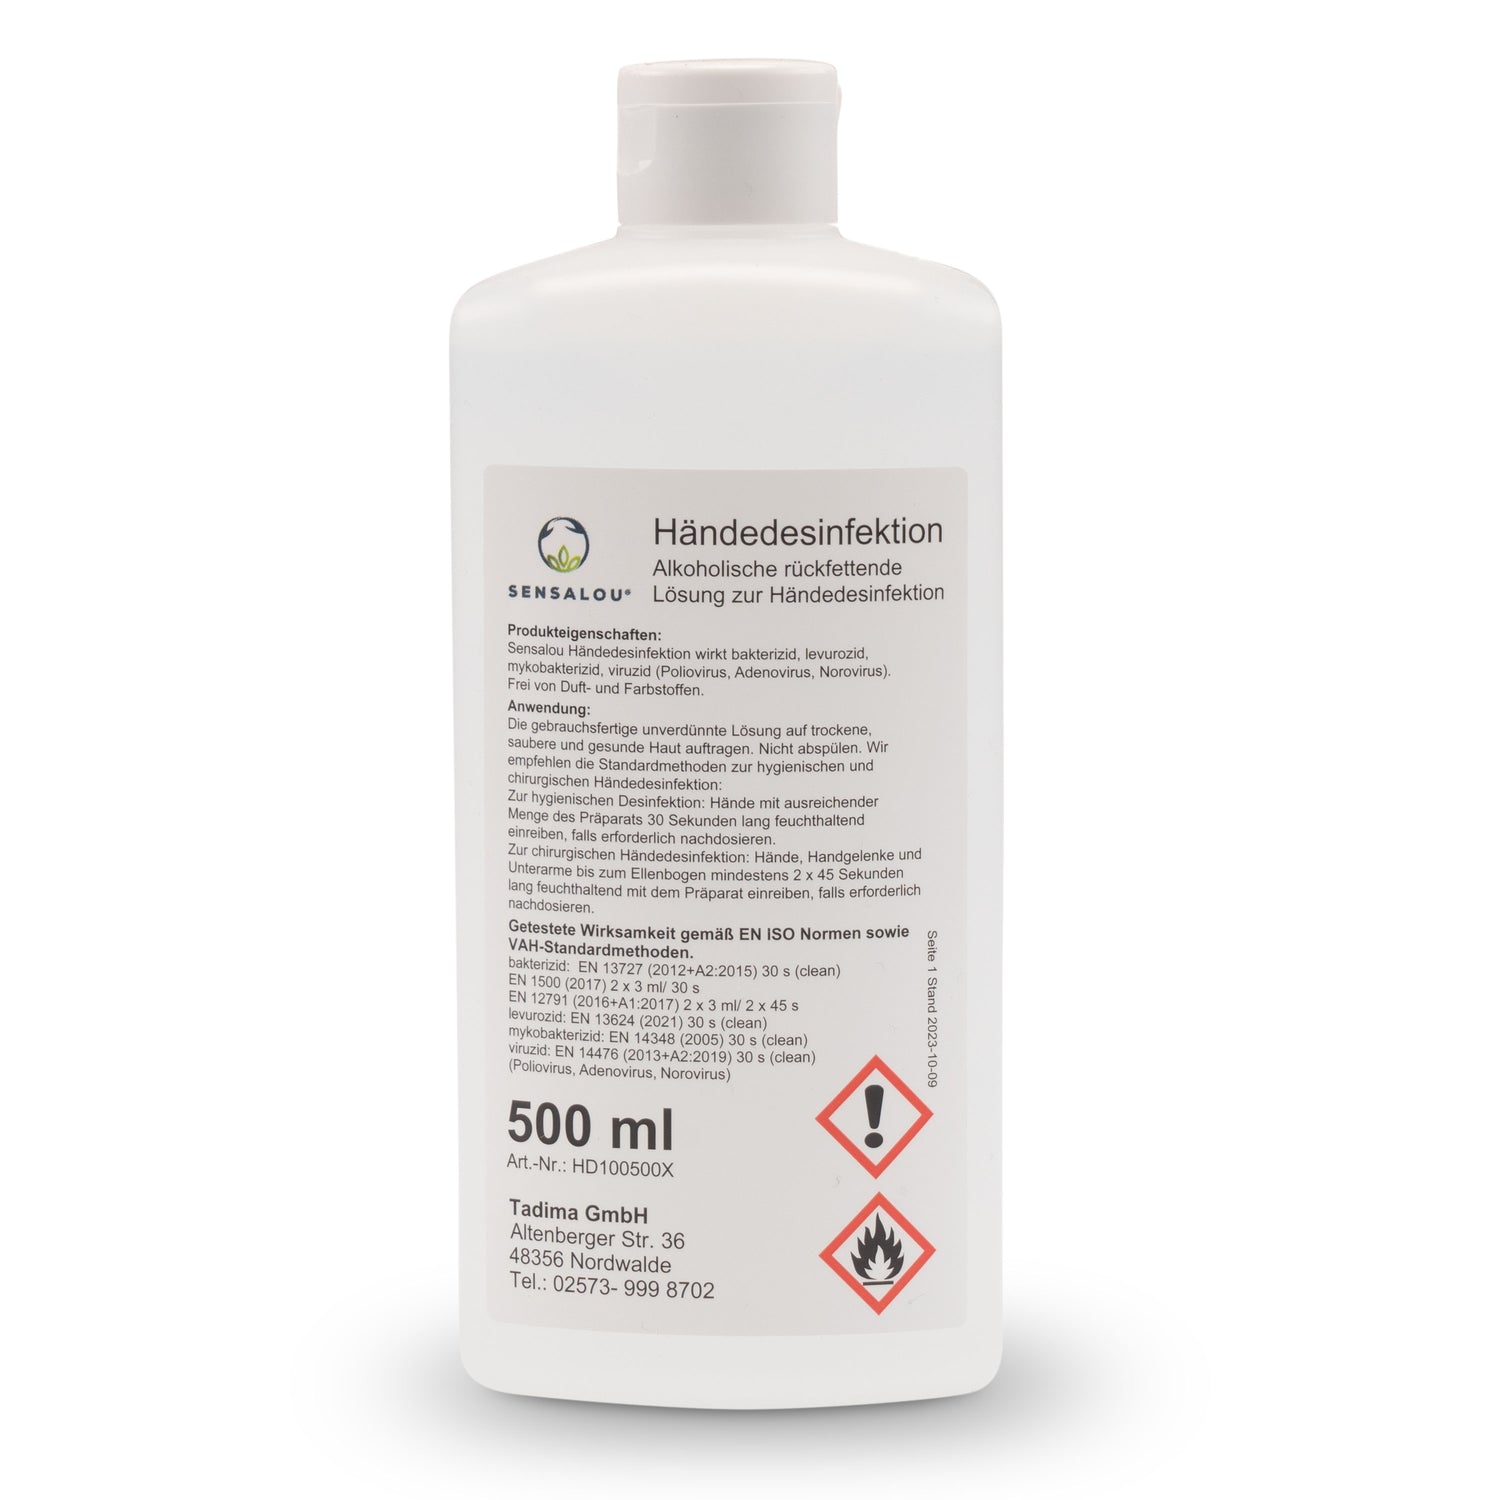 Sensalou disinfectant for skin and hands - 500 ml